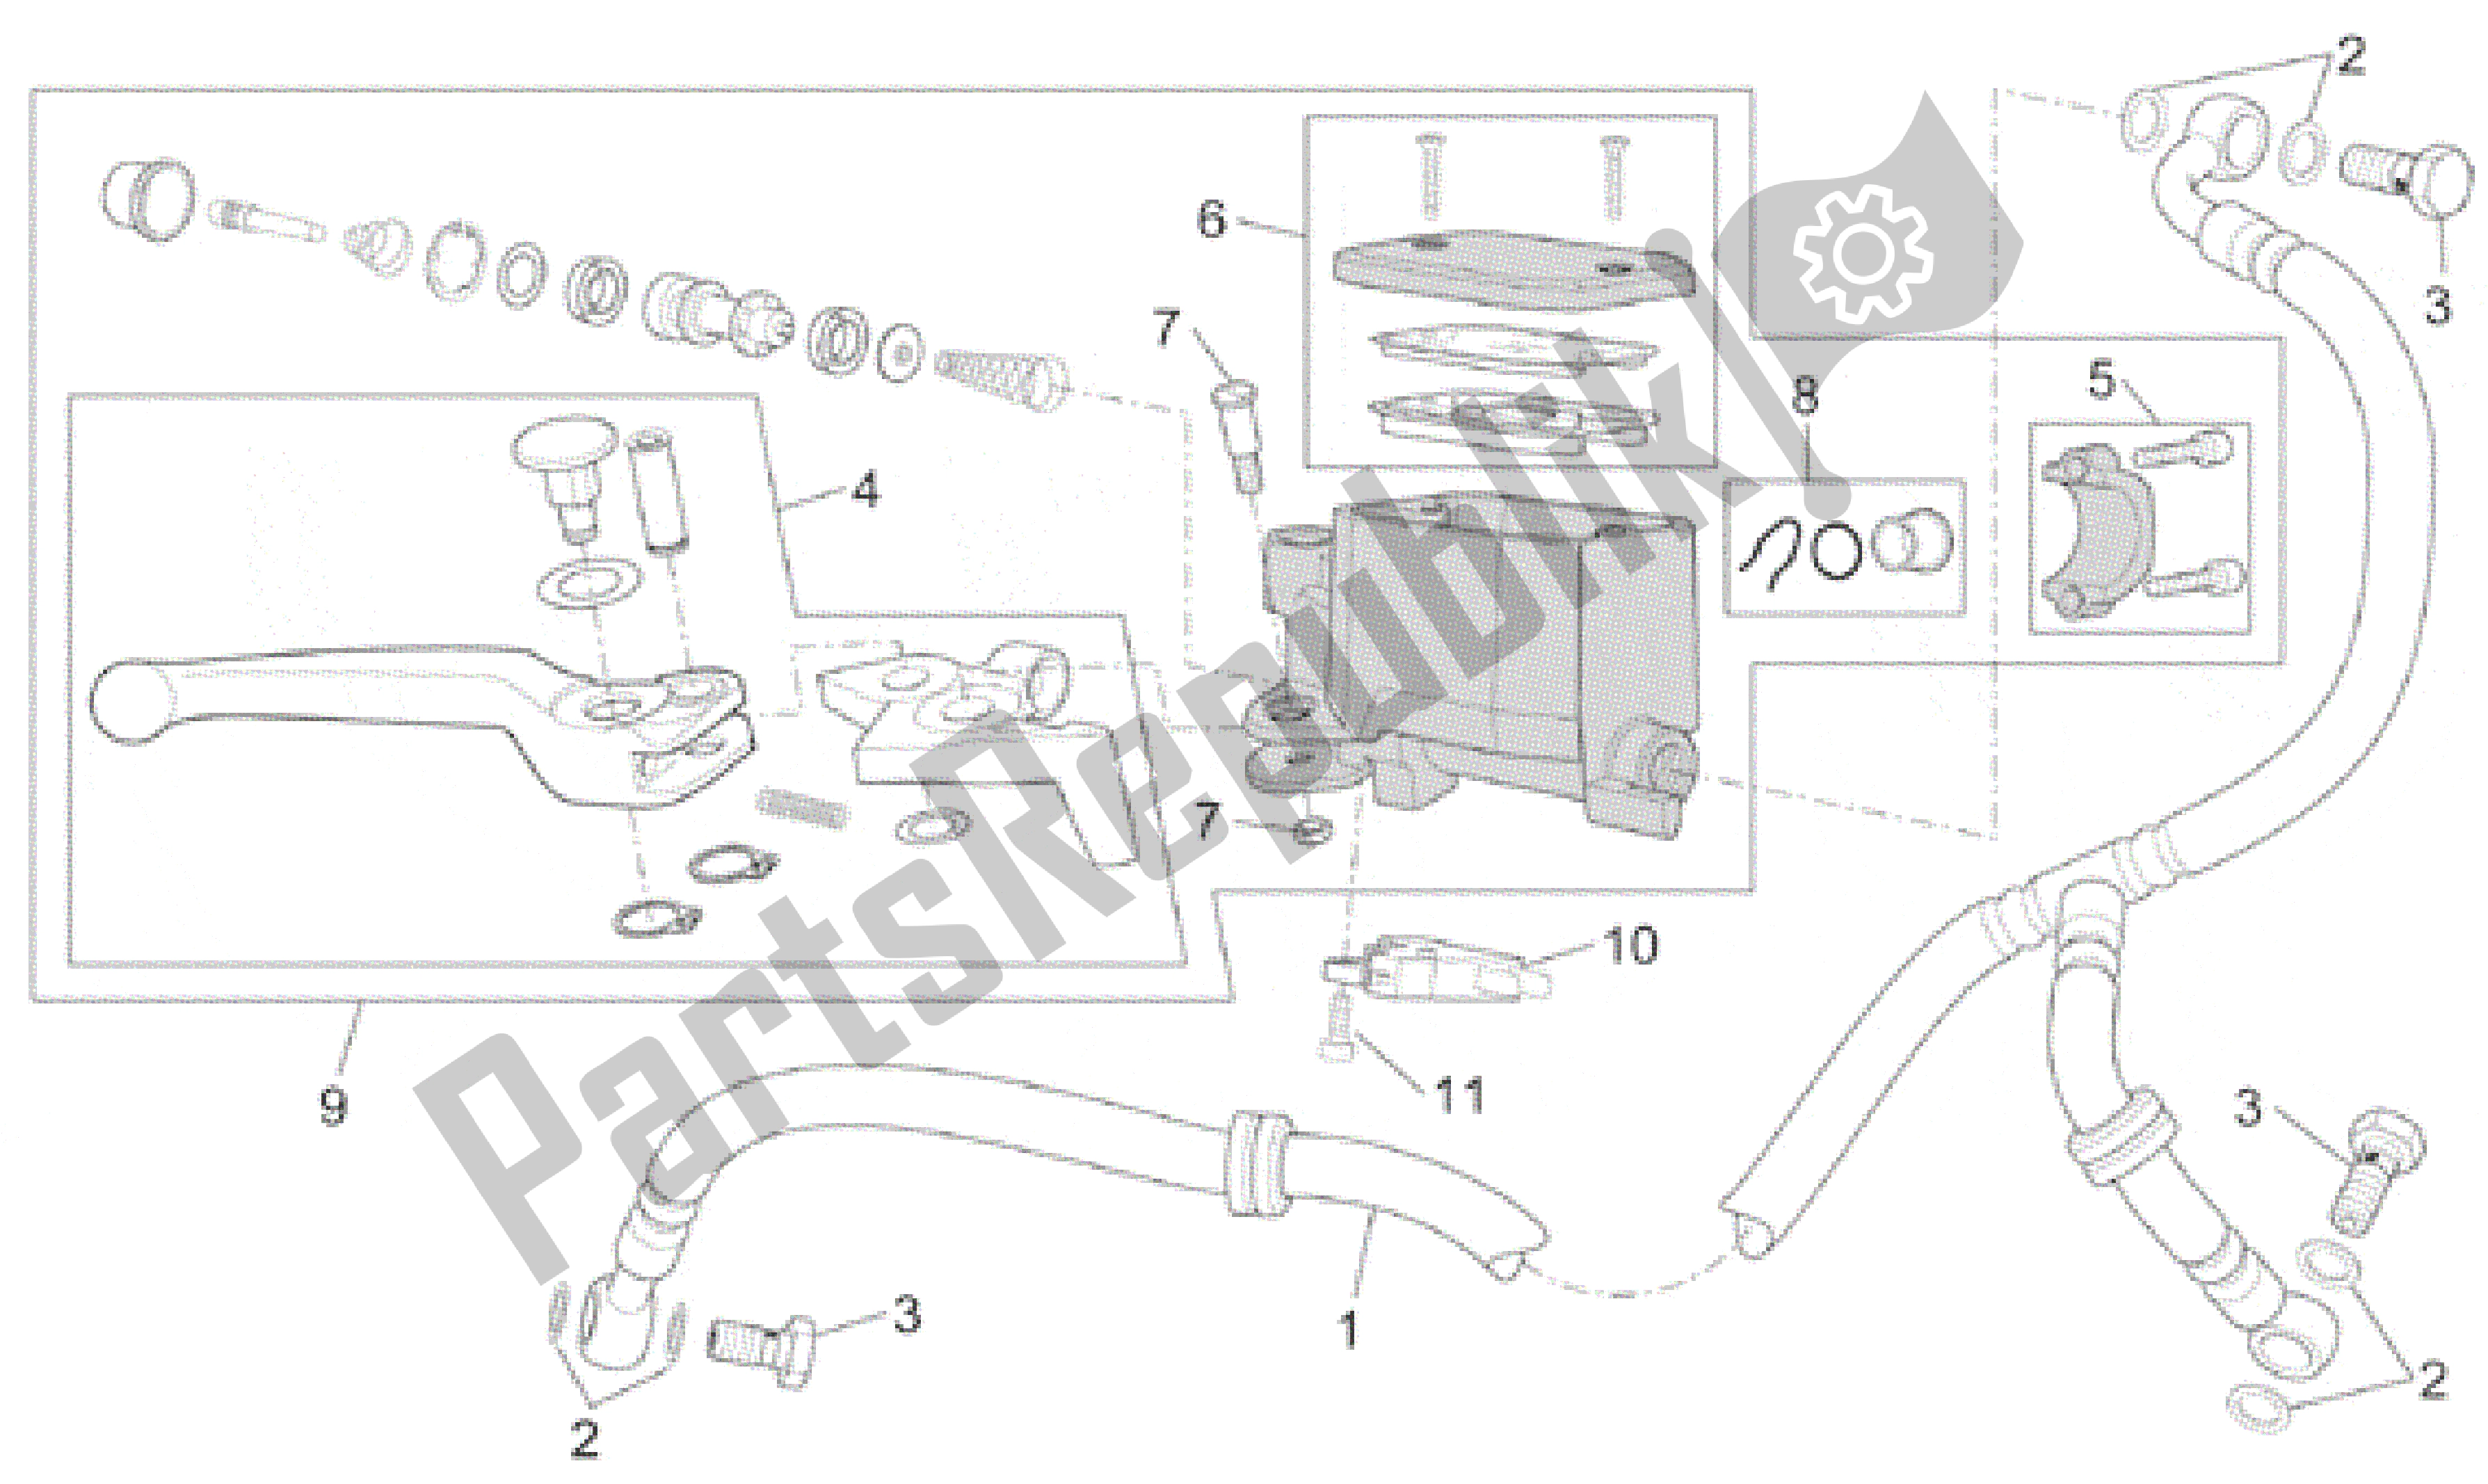 All parts for the Front Brake Pump of the Aprilia Caponord 1000 2001